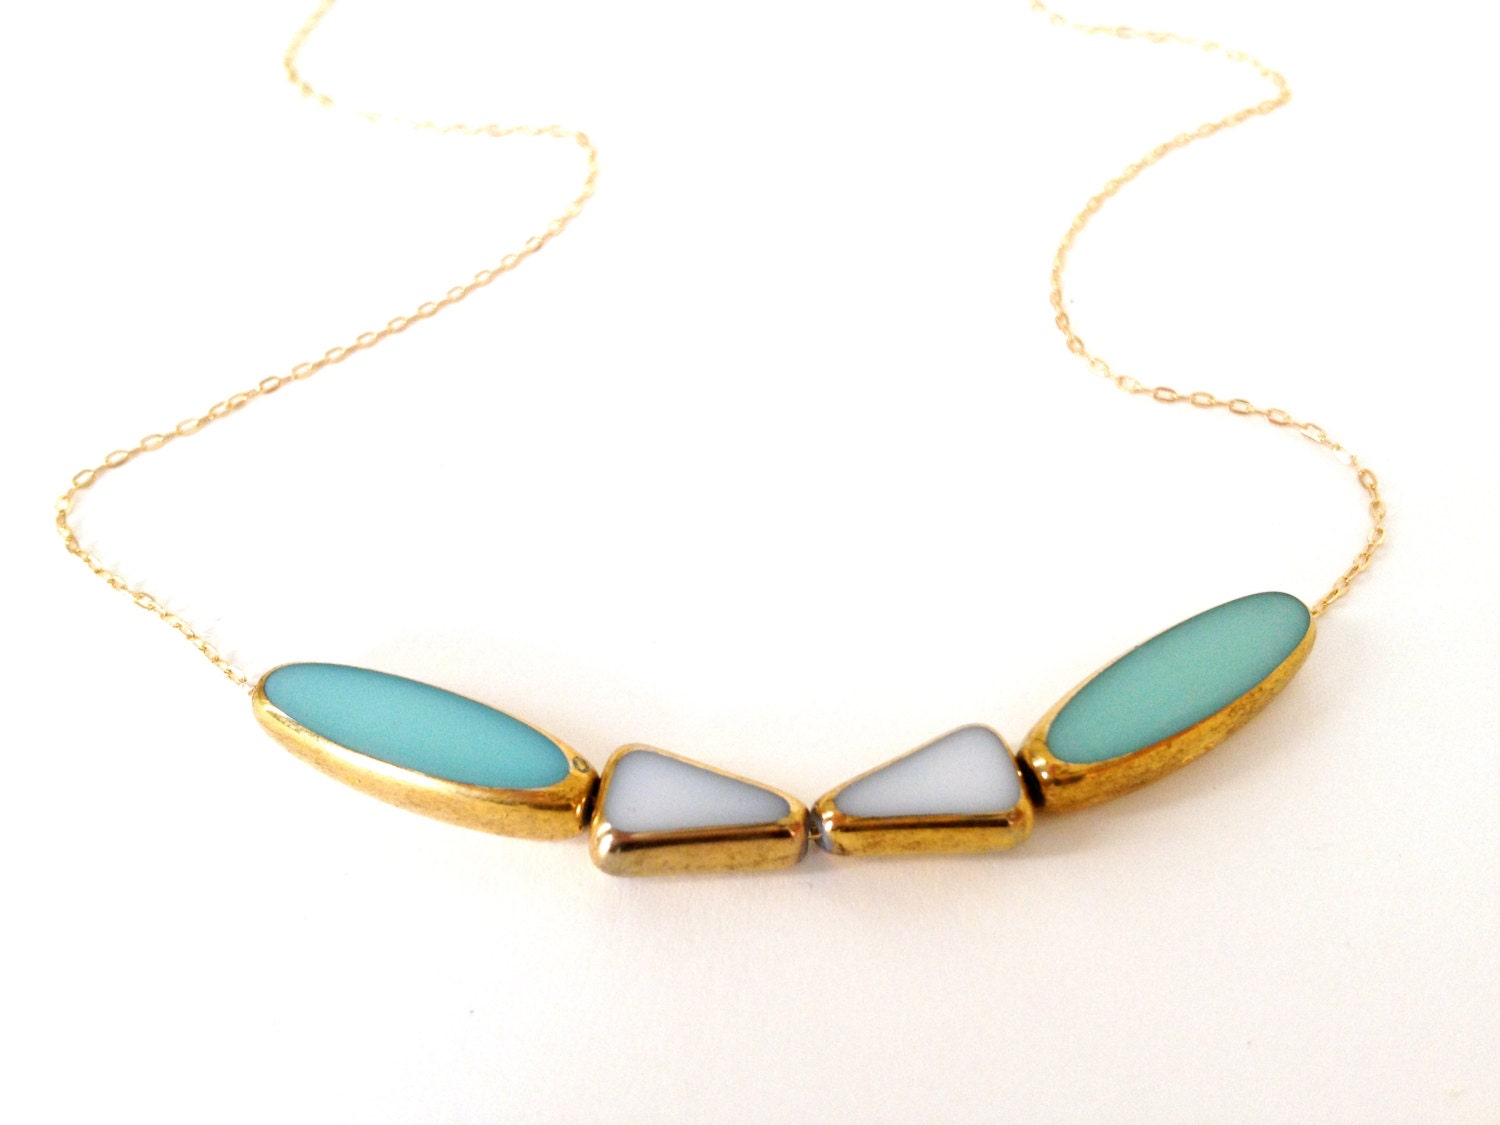 Tuxedo Necklace // 24k soft blue and white, 14k delicate gold chain //  jewelry by LilahV